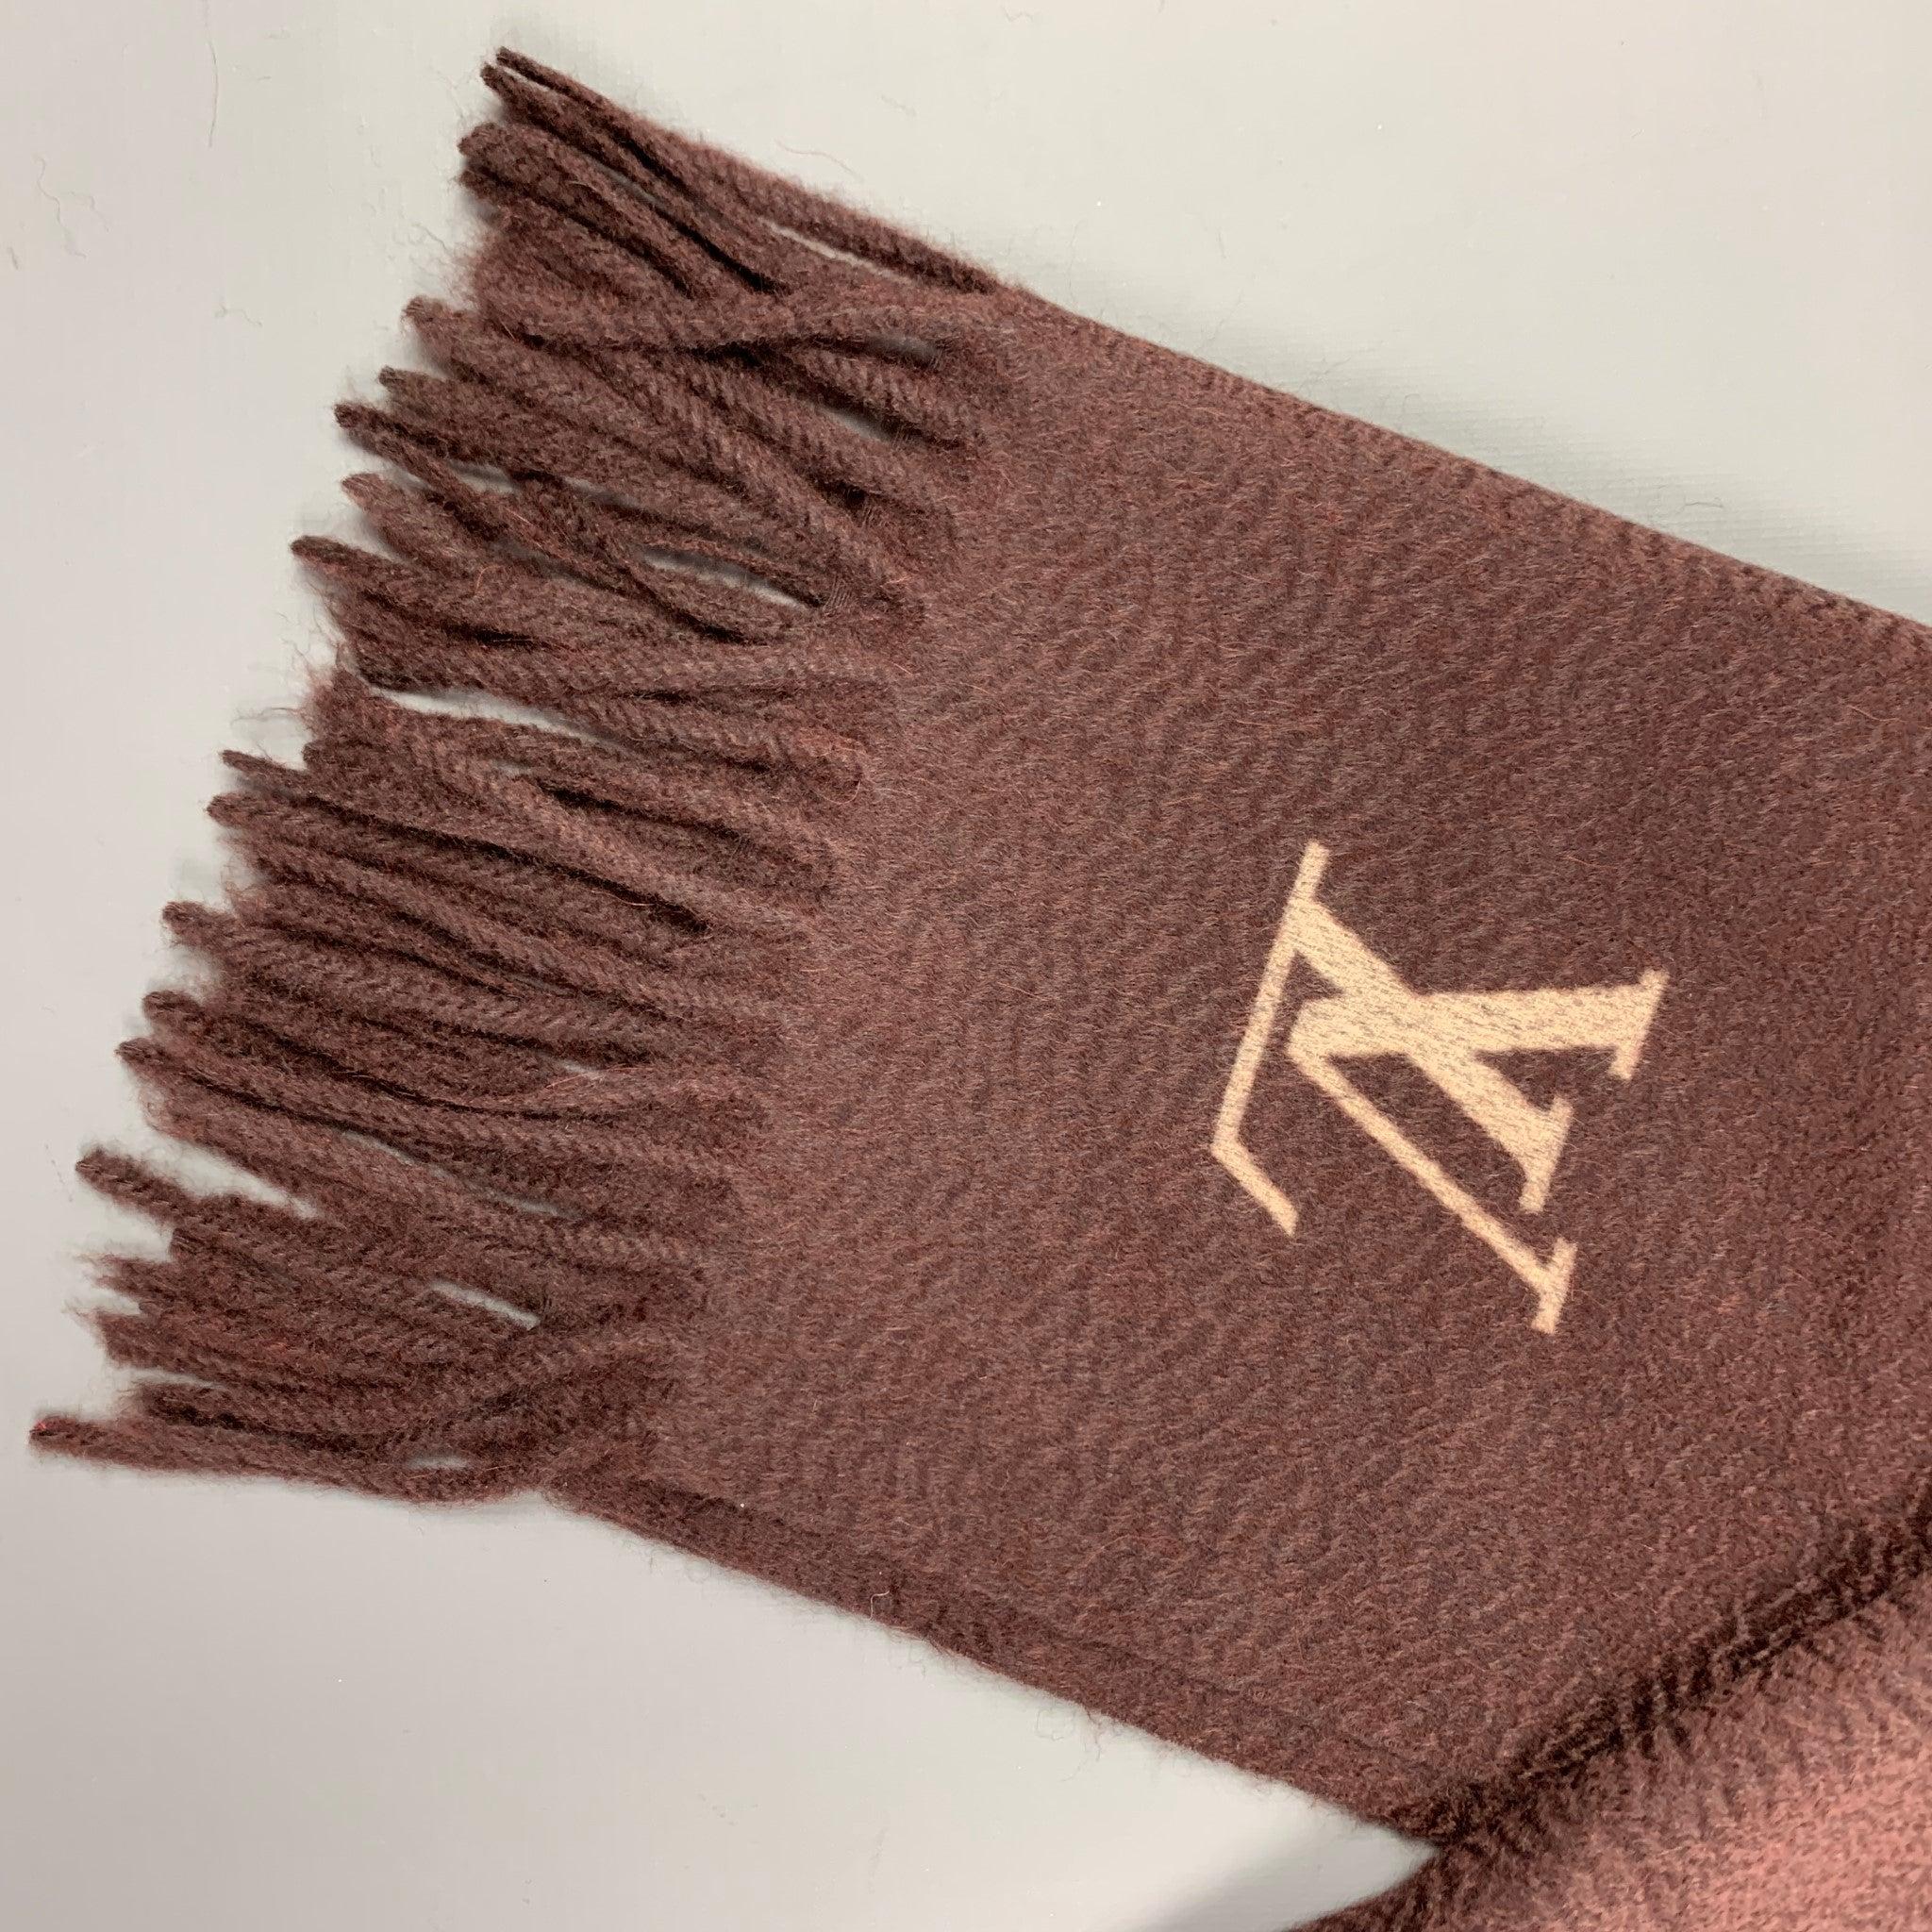 LOUIS VUITTON scarf comes in a brown knitted cashmere featuring a logo detail and a fringe trim. Made in Italy.
Very Good
Pre-Owned Condition. 

Measurements: 
  66 inches  x 15 inches 
  
  
 
Reference: 116528
Category: Scarves
More Details
   